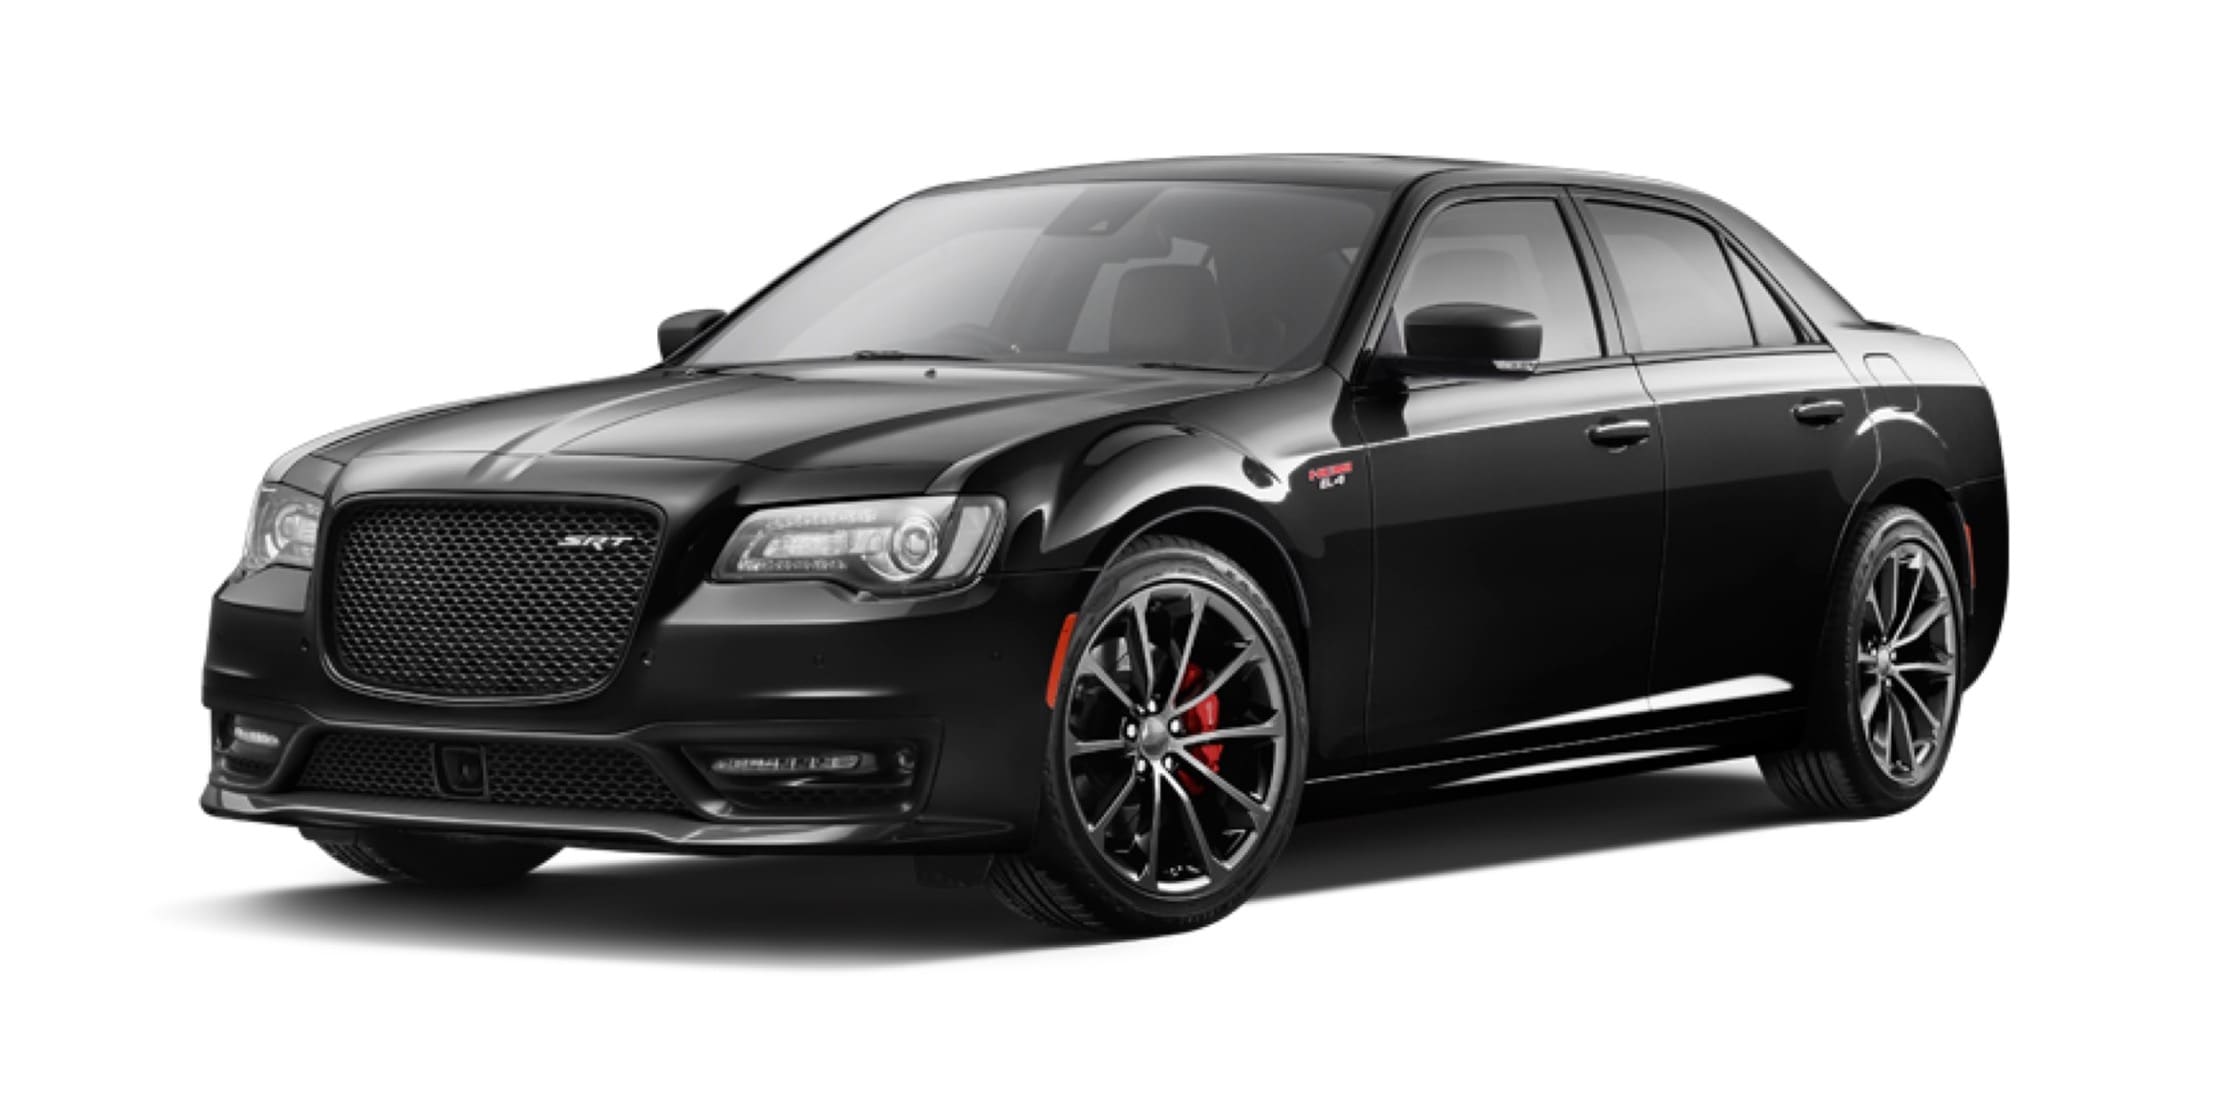 Chrysler 300 Srt Stripped Back To One Model Gets Price Rise Caradvice